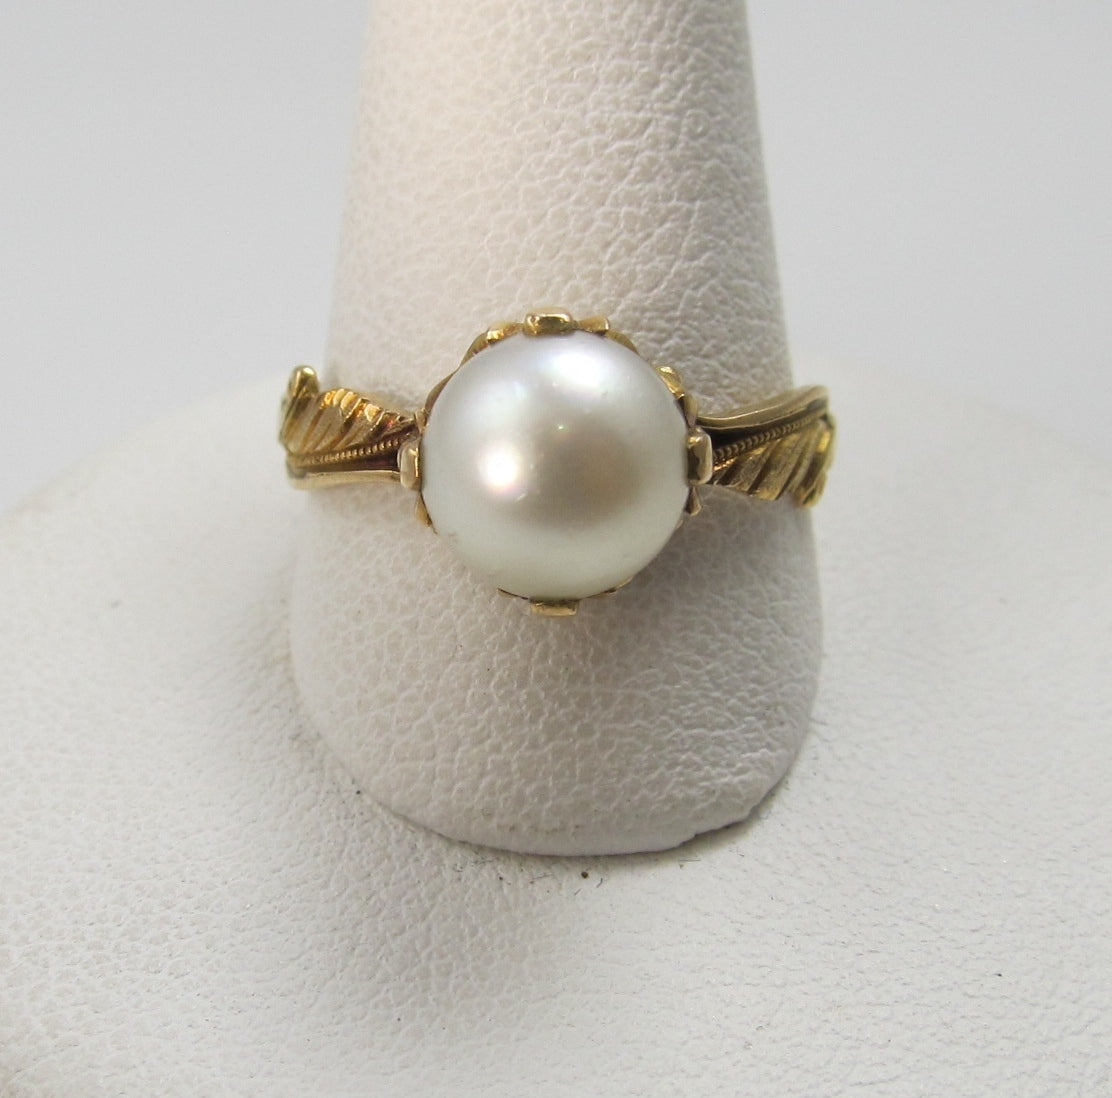 18k Yellow Gold Ring With A Pearl, Circa 1930